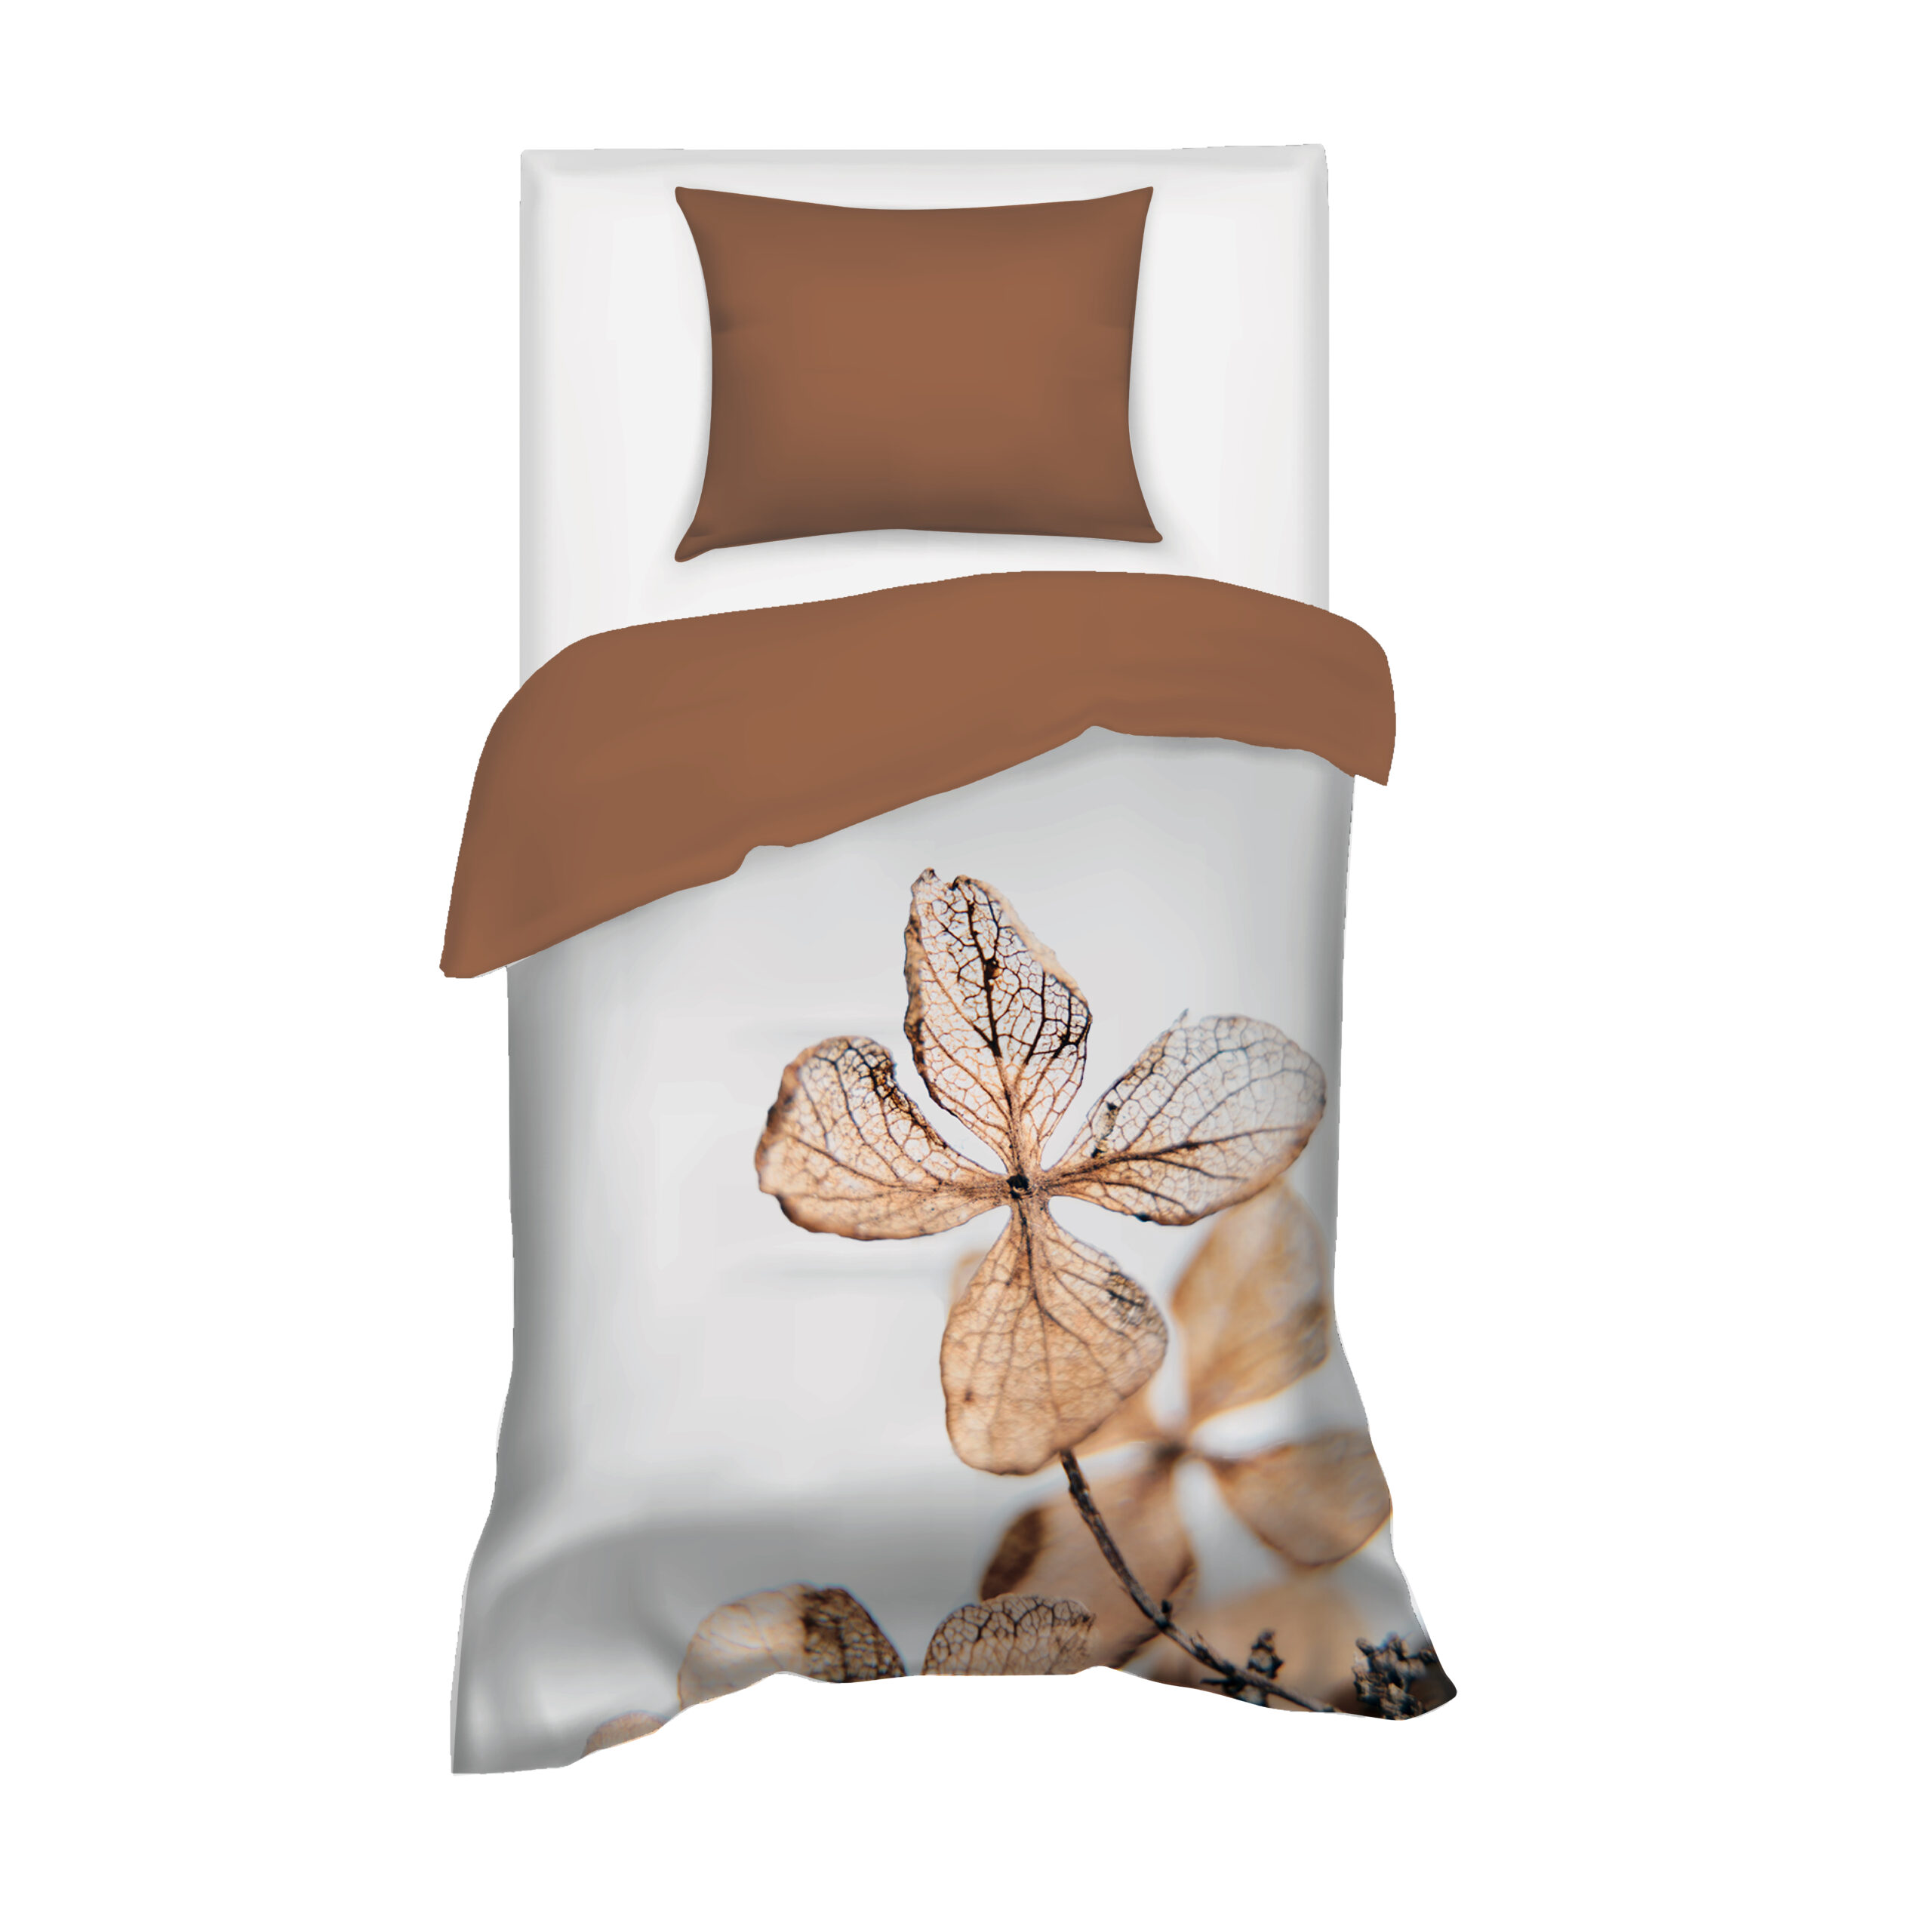 Villa Madelief 140 x 200cm Brown White Dry Flower Printed Duvet Cover with 1 Pillowcase